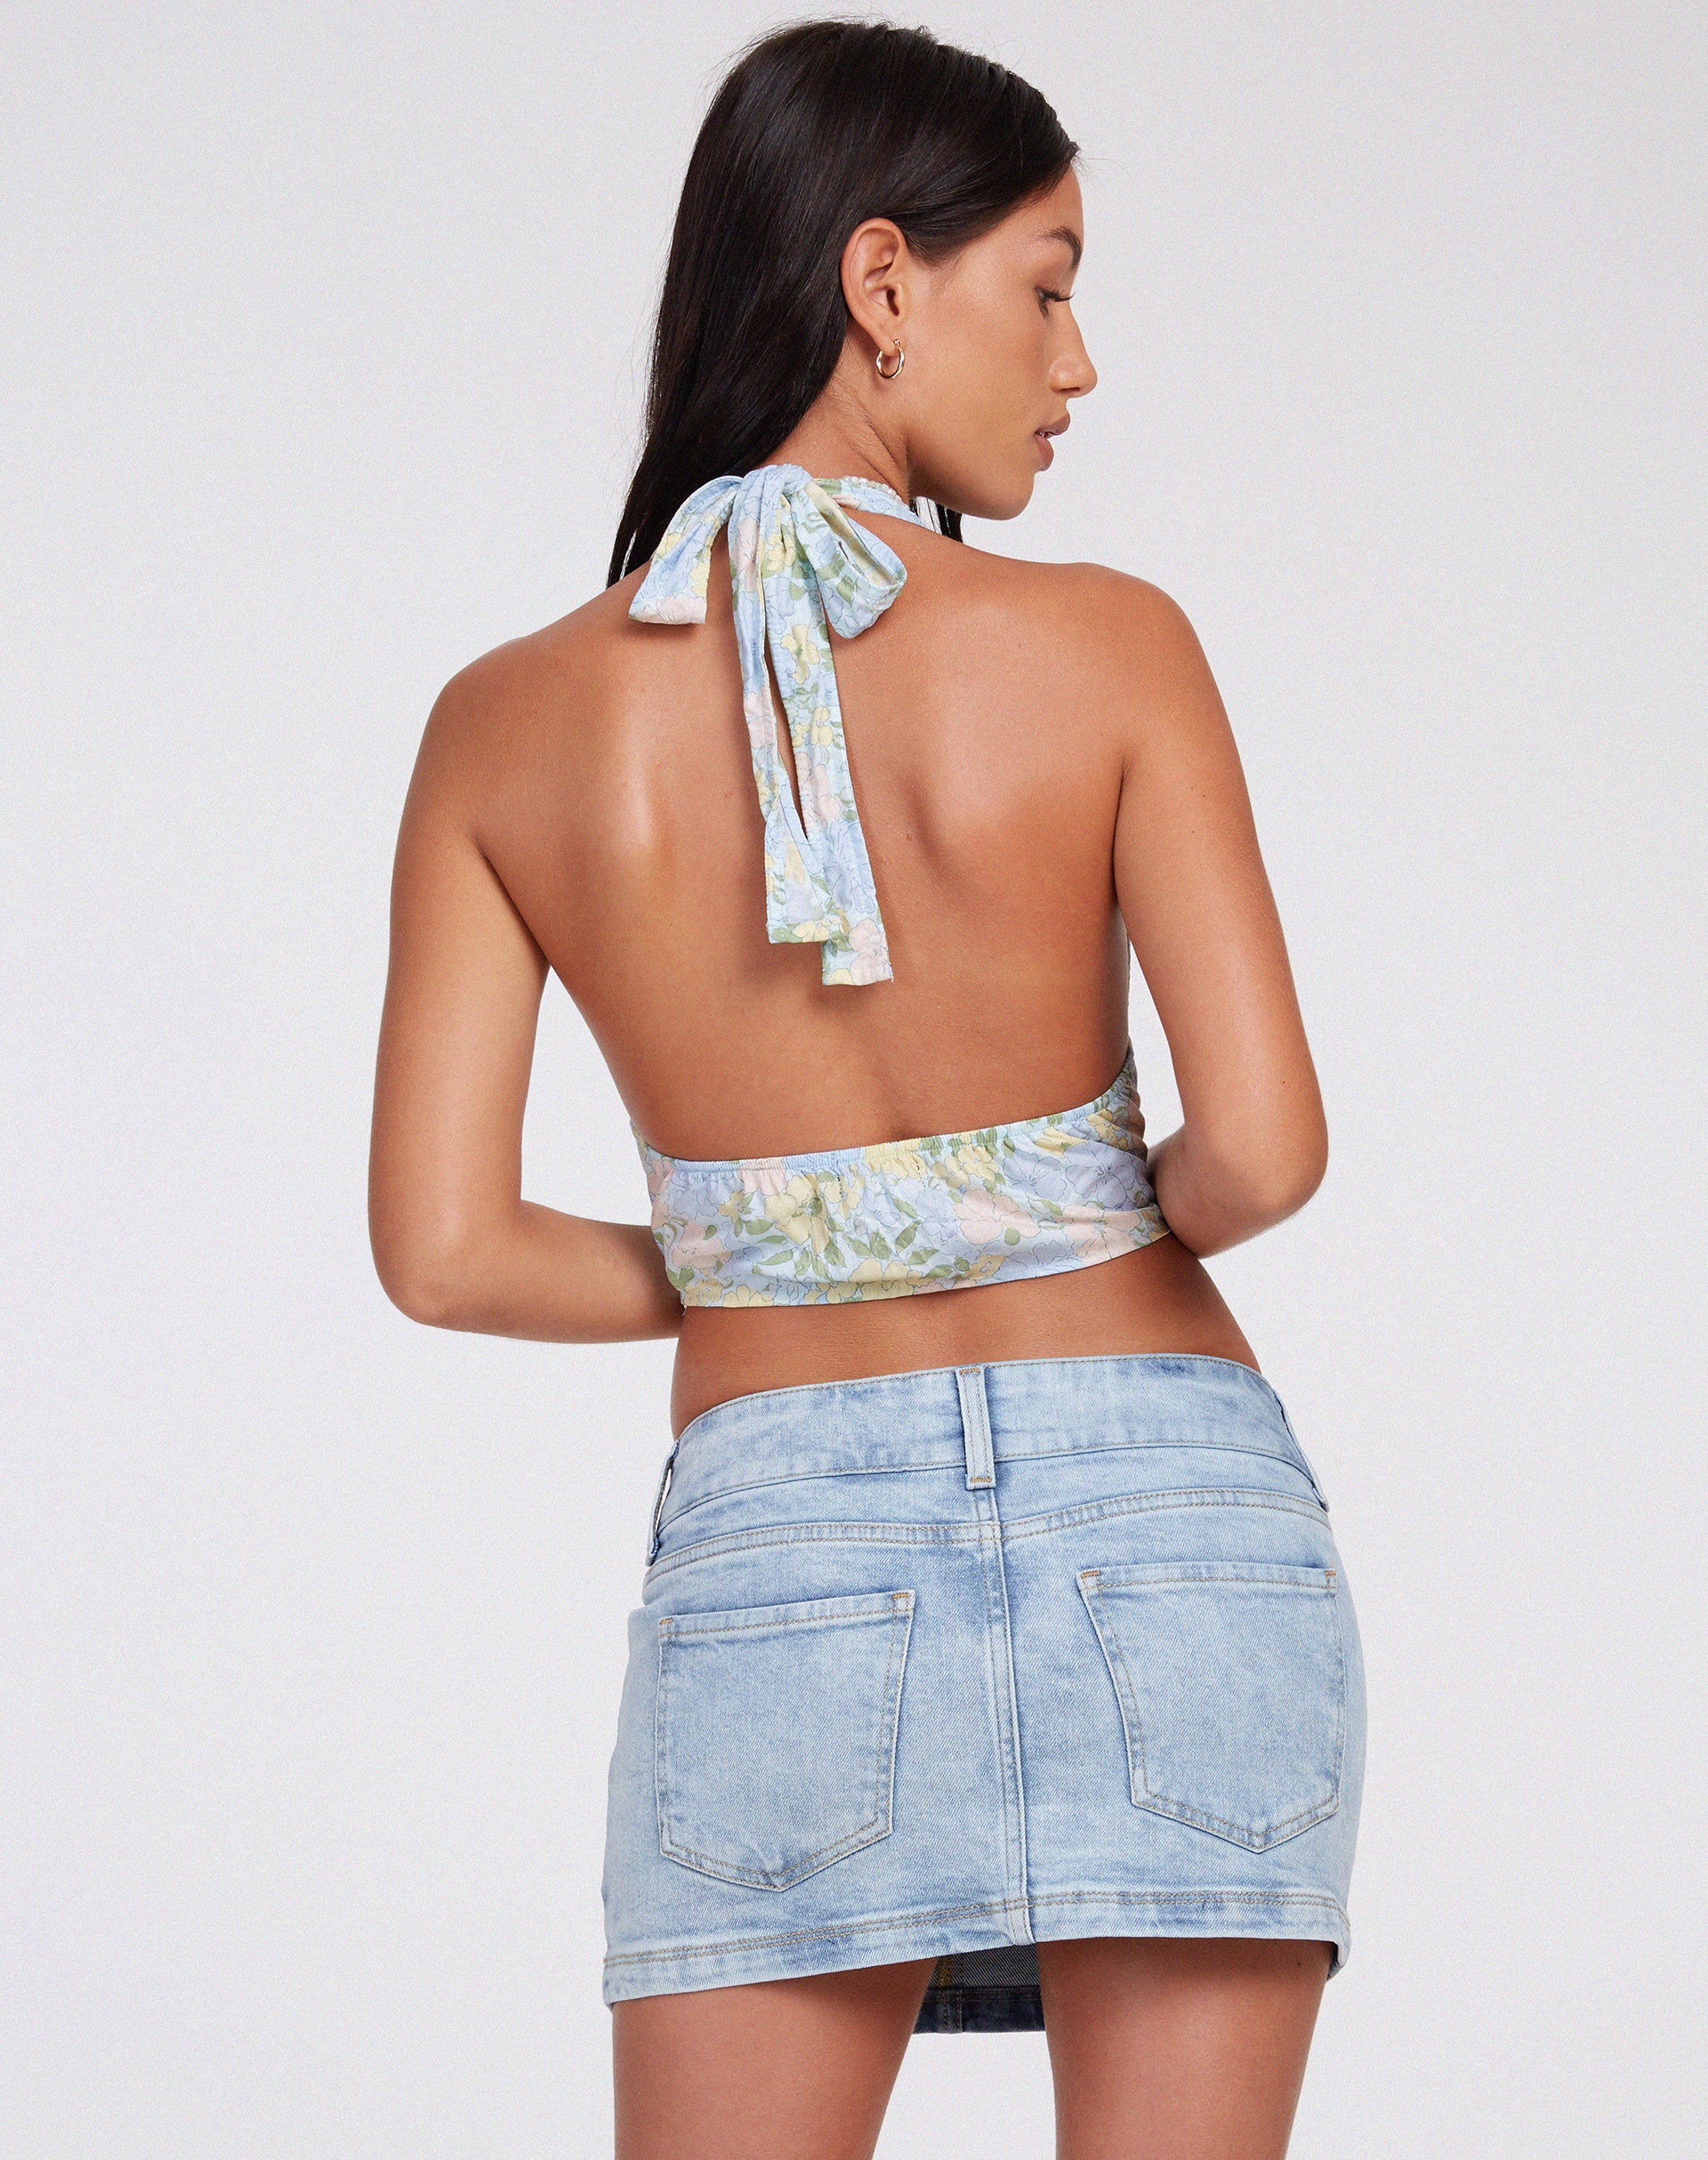 Image of Nanda Crop Top in Washed Out Pastel Floral